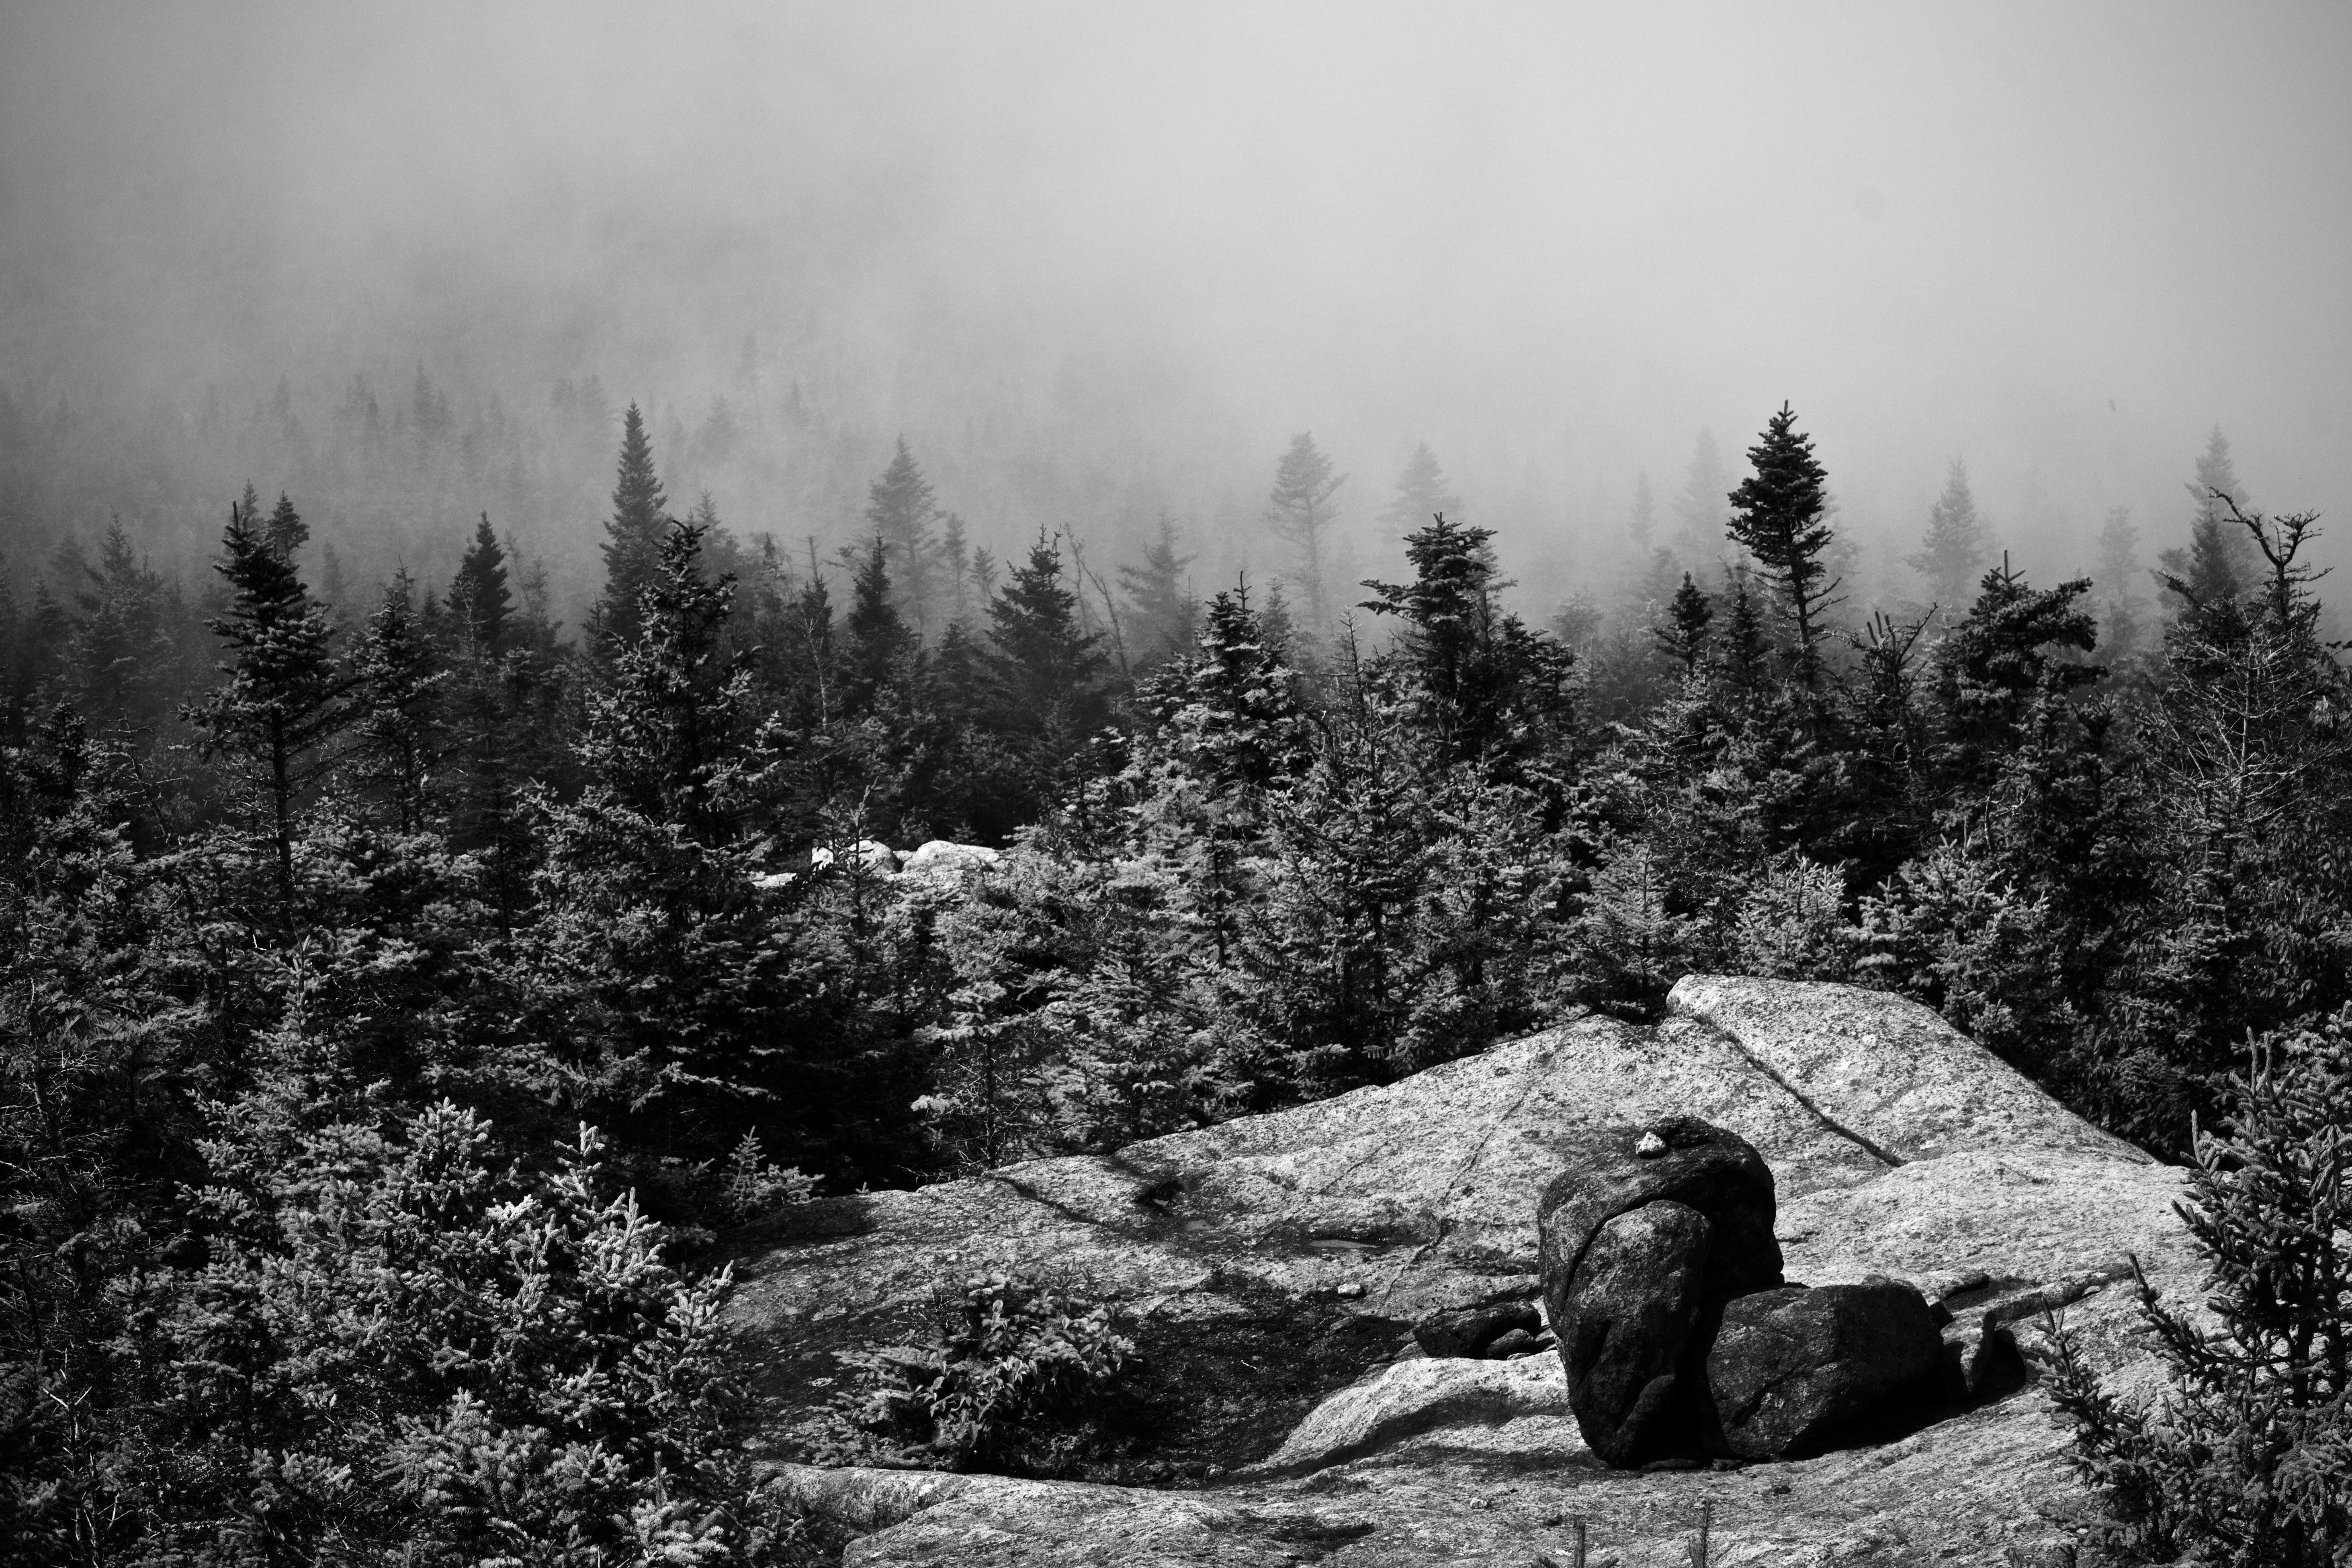 We summitted Grace Peak on the 100th anniversary of the establishment of the Adirondack 46ers–the 46 peaks higher than 4,000 feet. Clouds masked our views in some directions but not all, and this photo was the reward for our efforts.